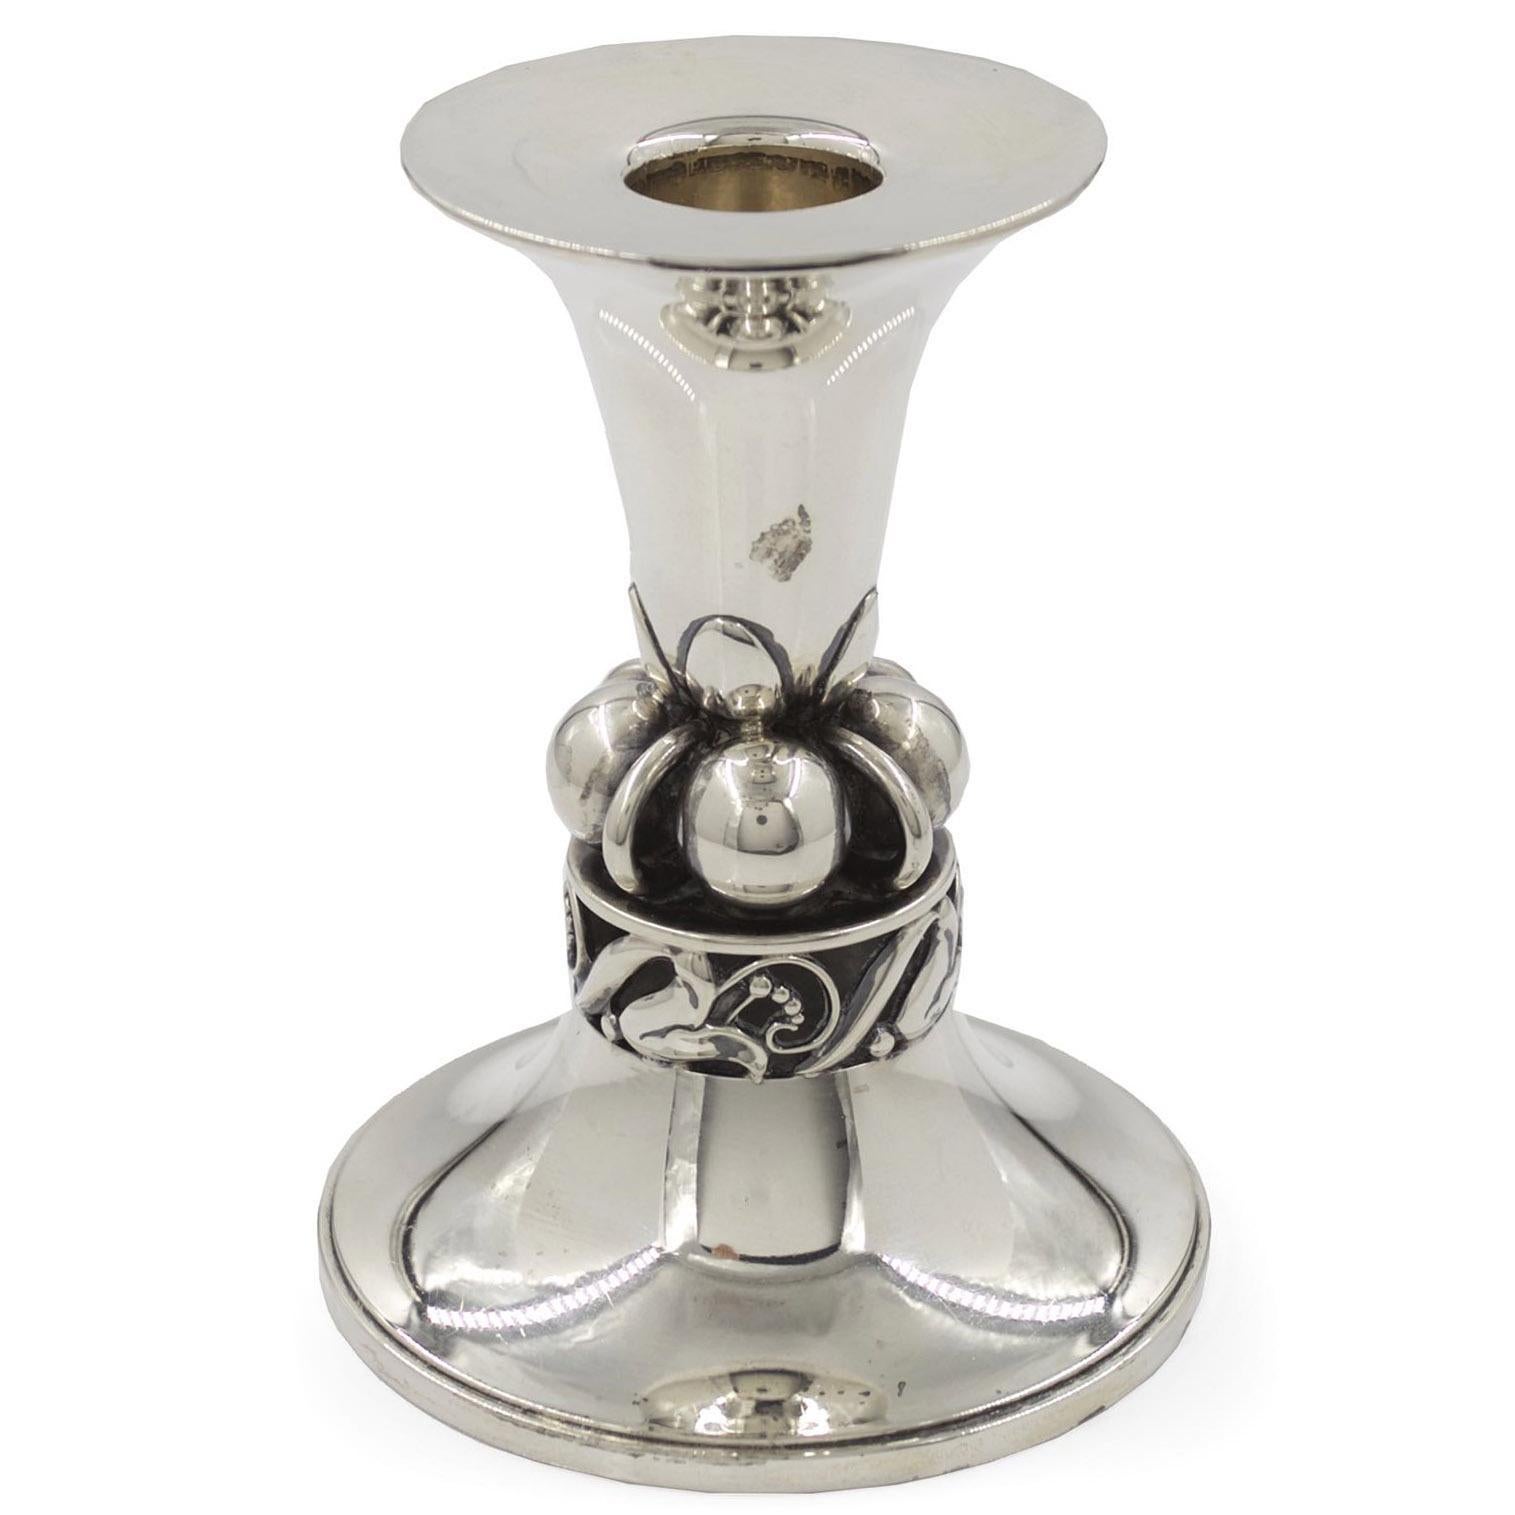 This fine sterling silver candlestick designed by Alphonse La Paglia for Georg Jensen from the middle of the 20th century is his distinctive no. 118 form. A complex design, it features a flared sconce with a tapered baluster surrounded by spheres